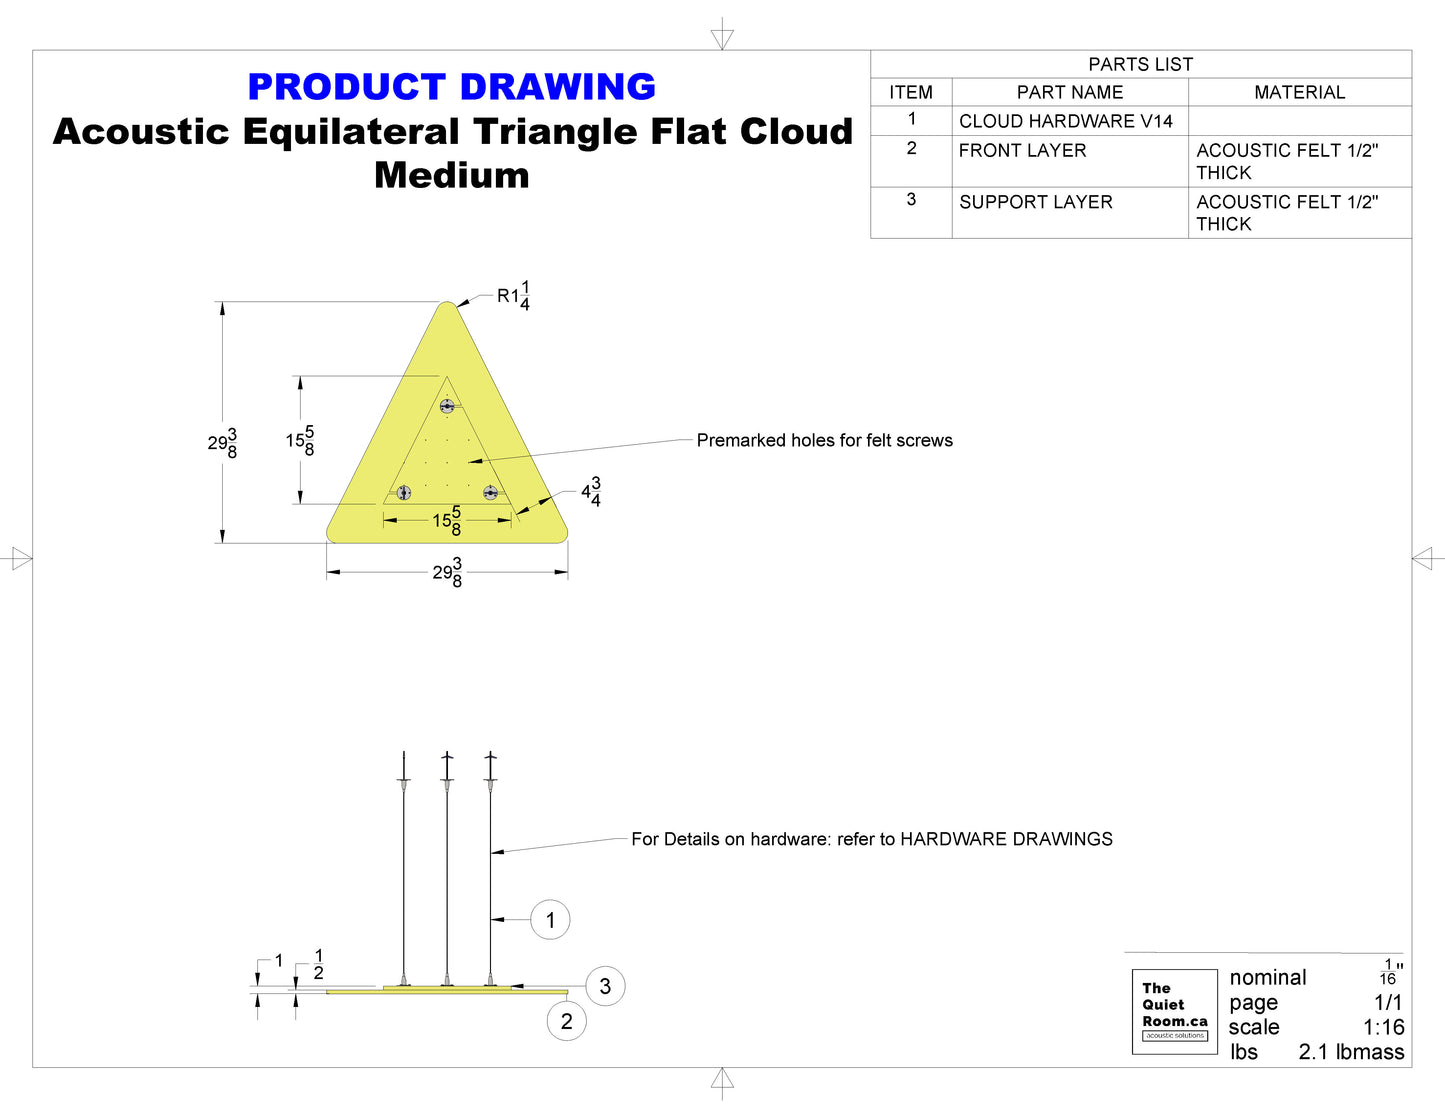 Acoustic Flat Cloud - Medium Equilateral Triangle